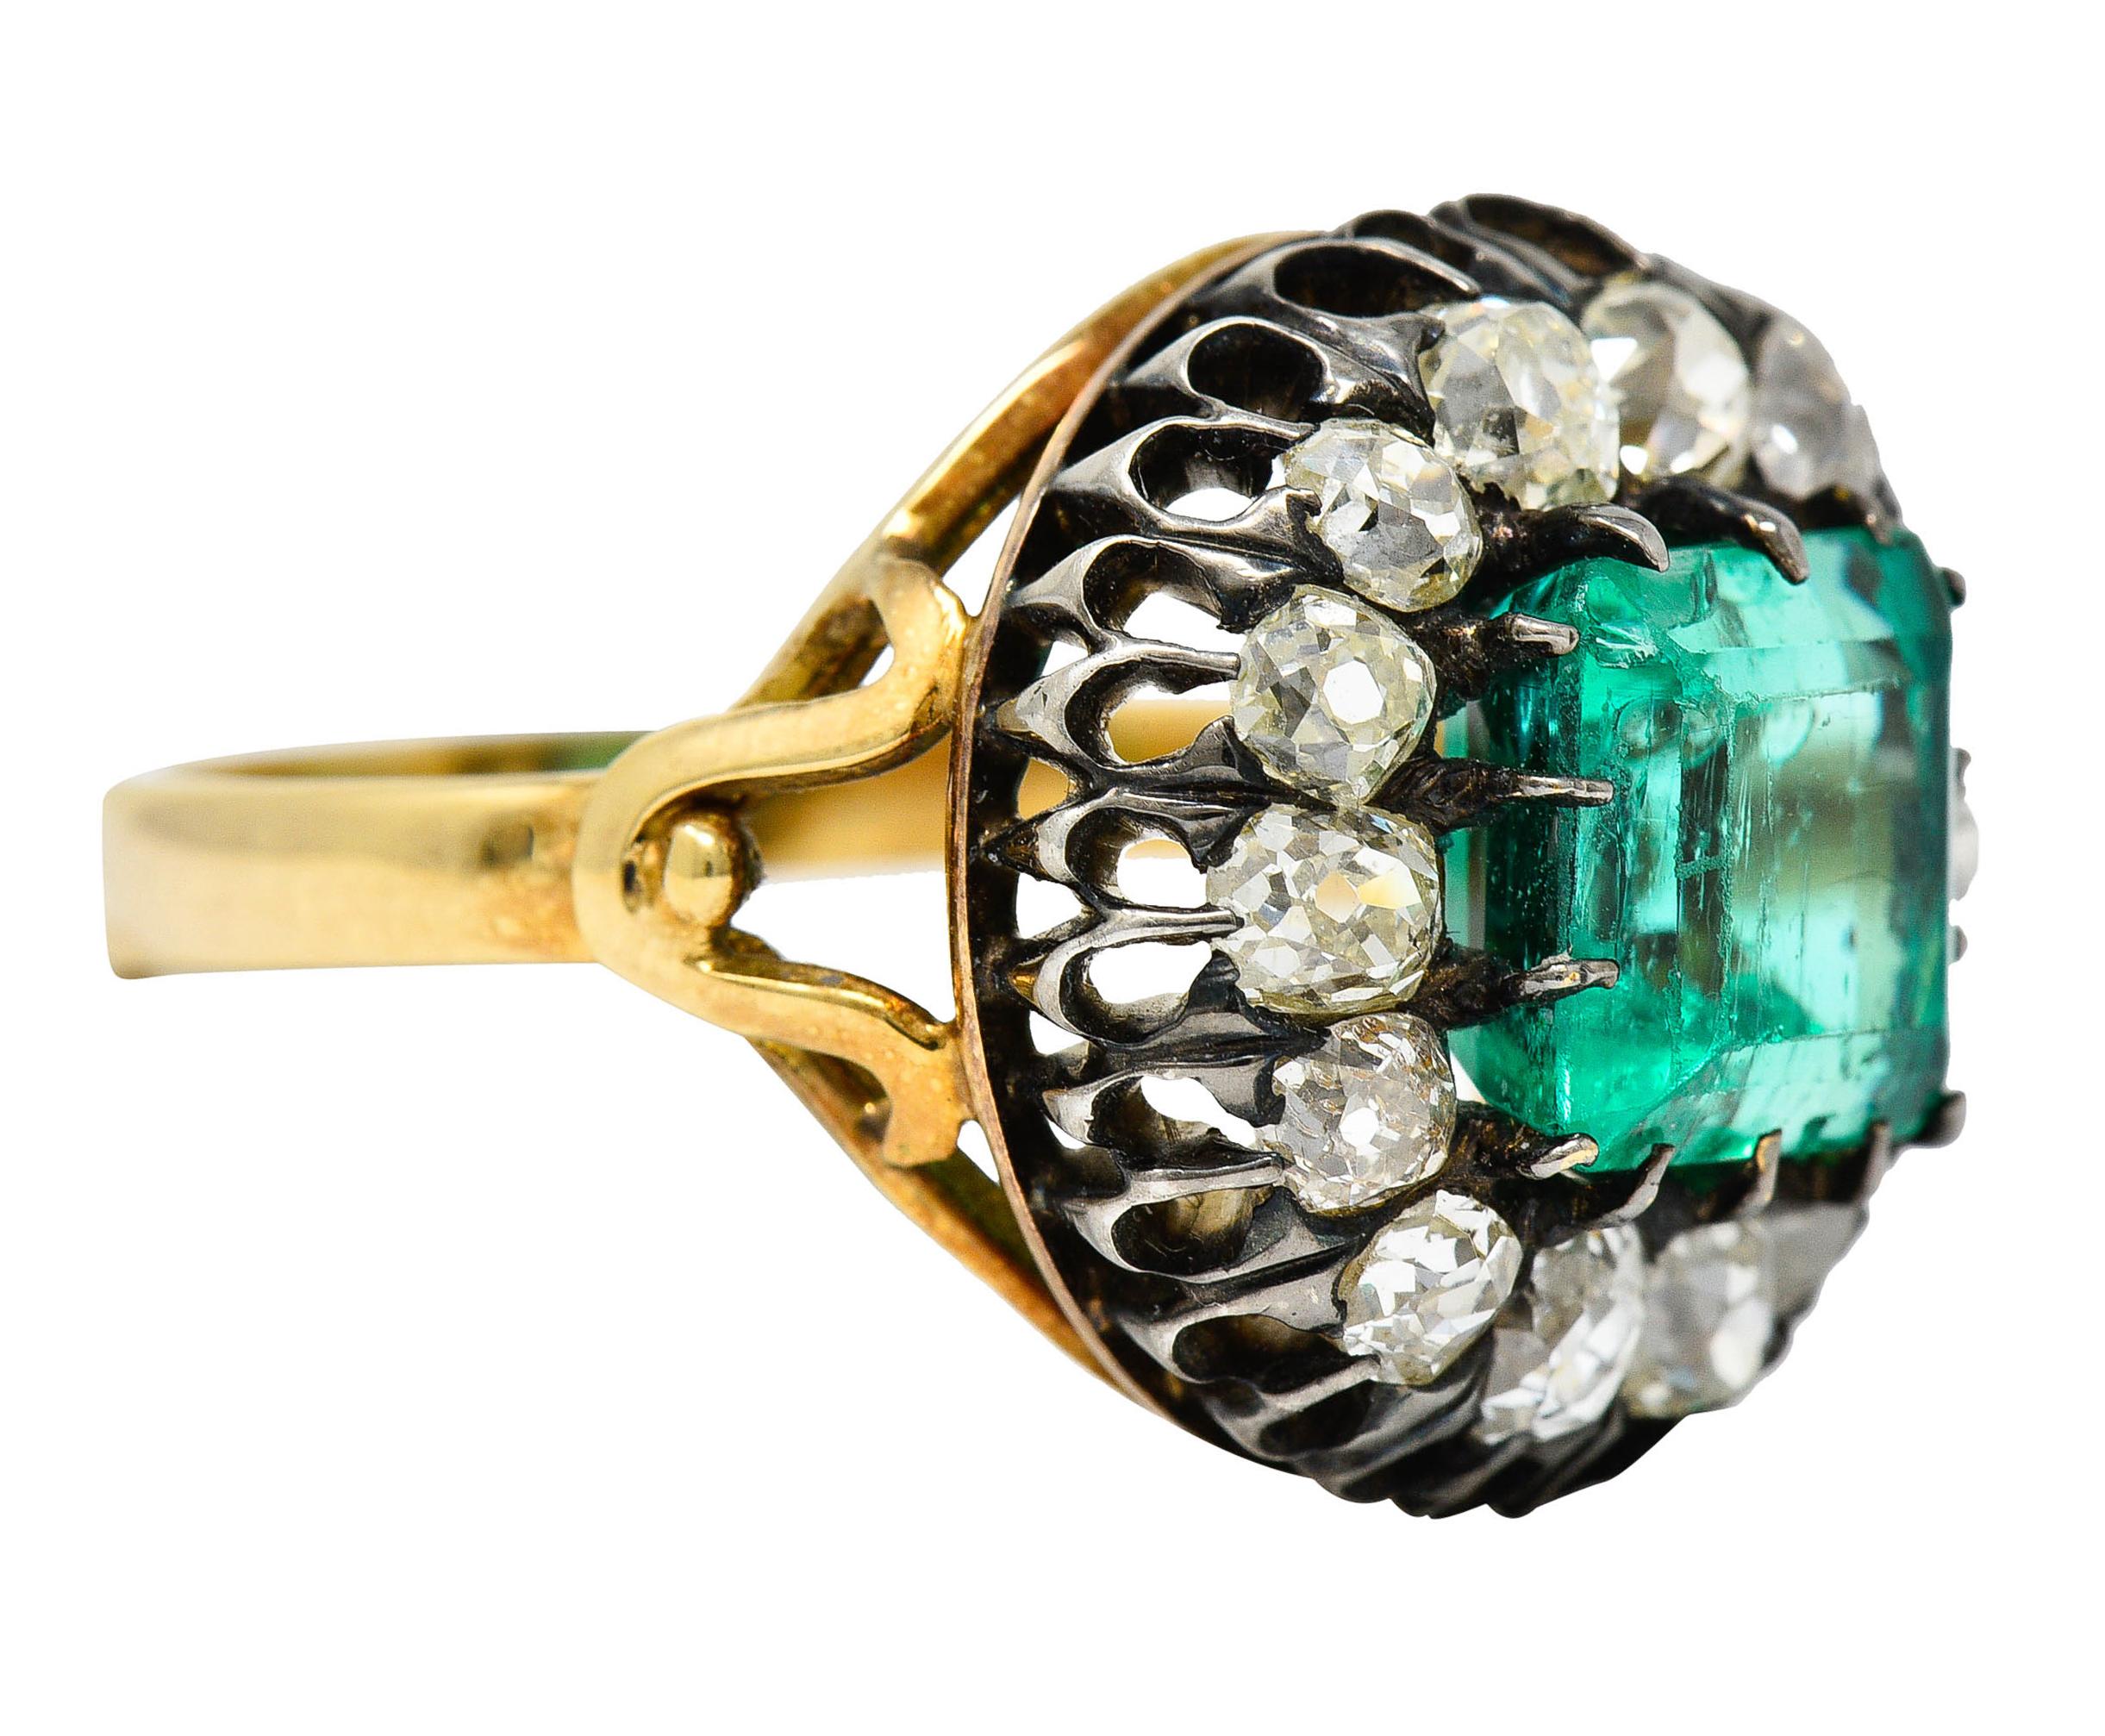 Cluster ring centers a Colombian emerald cut emerald weighing approximately 2.85 carats

Transparent with medium light bluish green color and minor clarity enhancements (F1)

Surrounded by a halo of old mine cut diamonds - set in a silver belcher